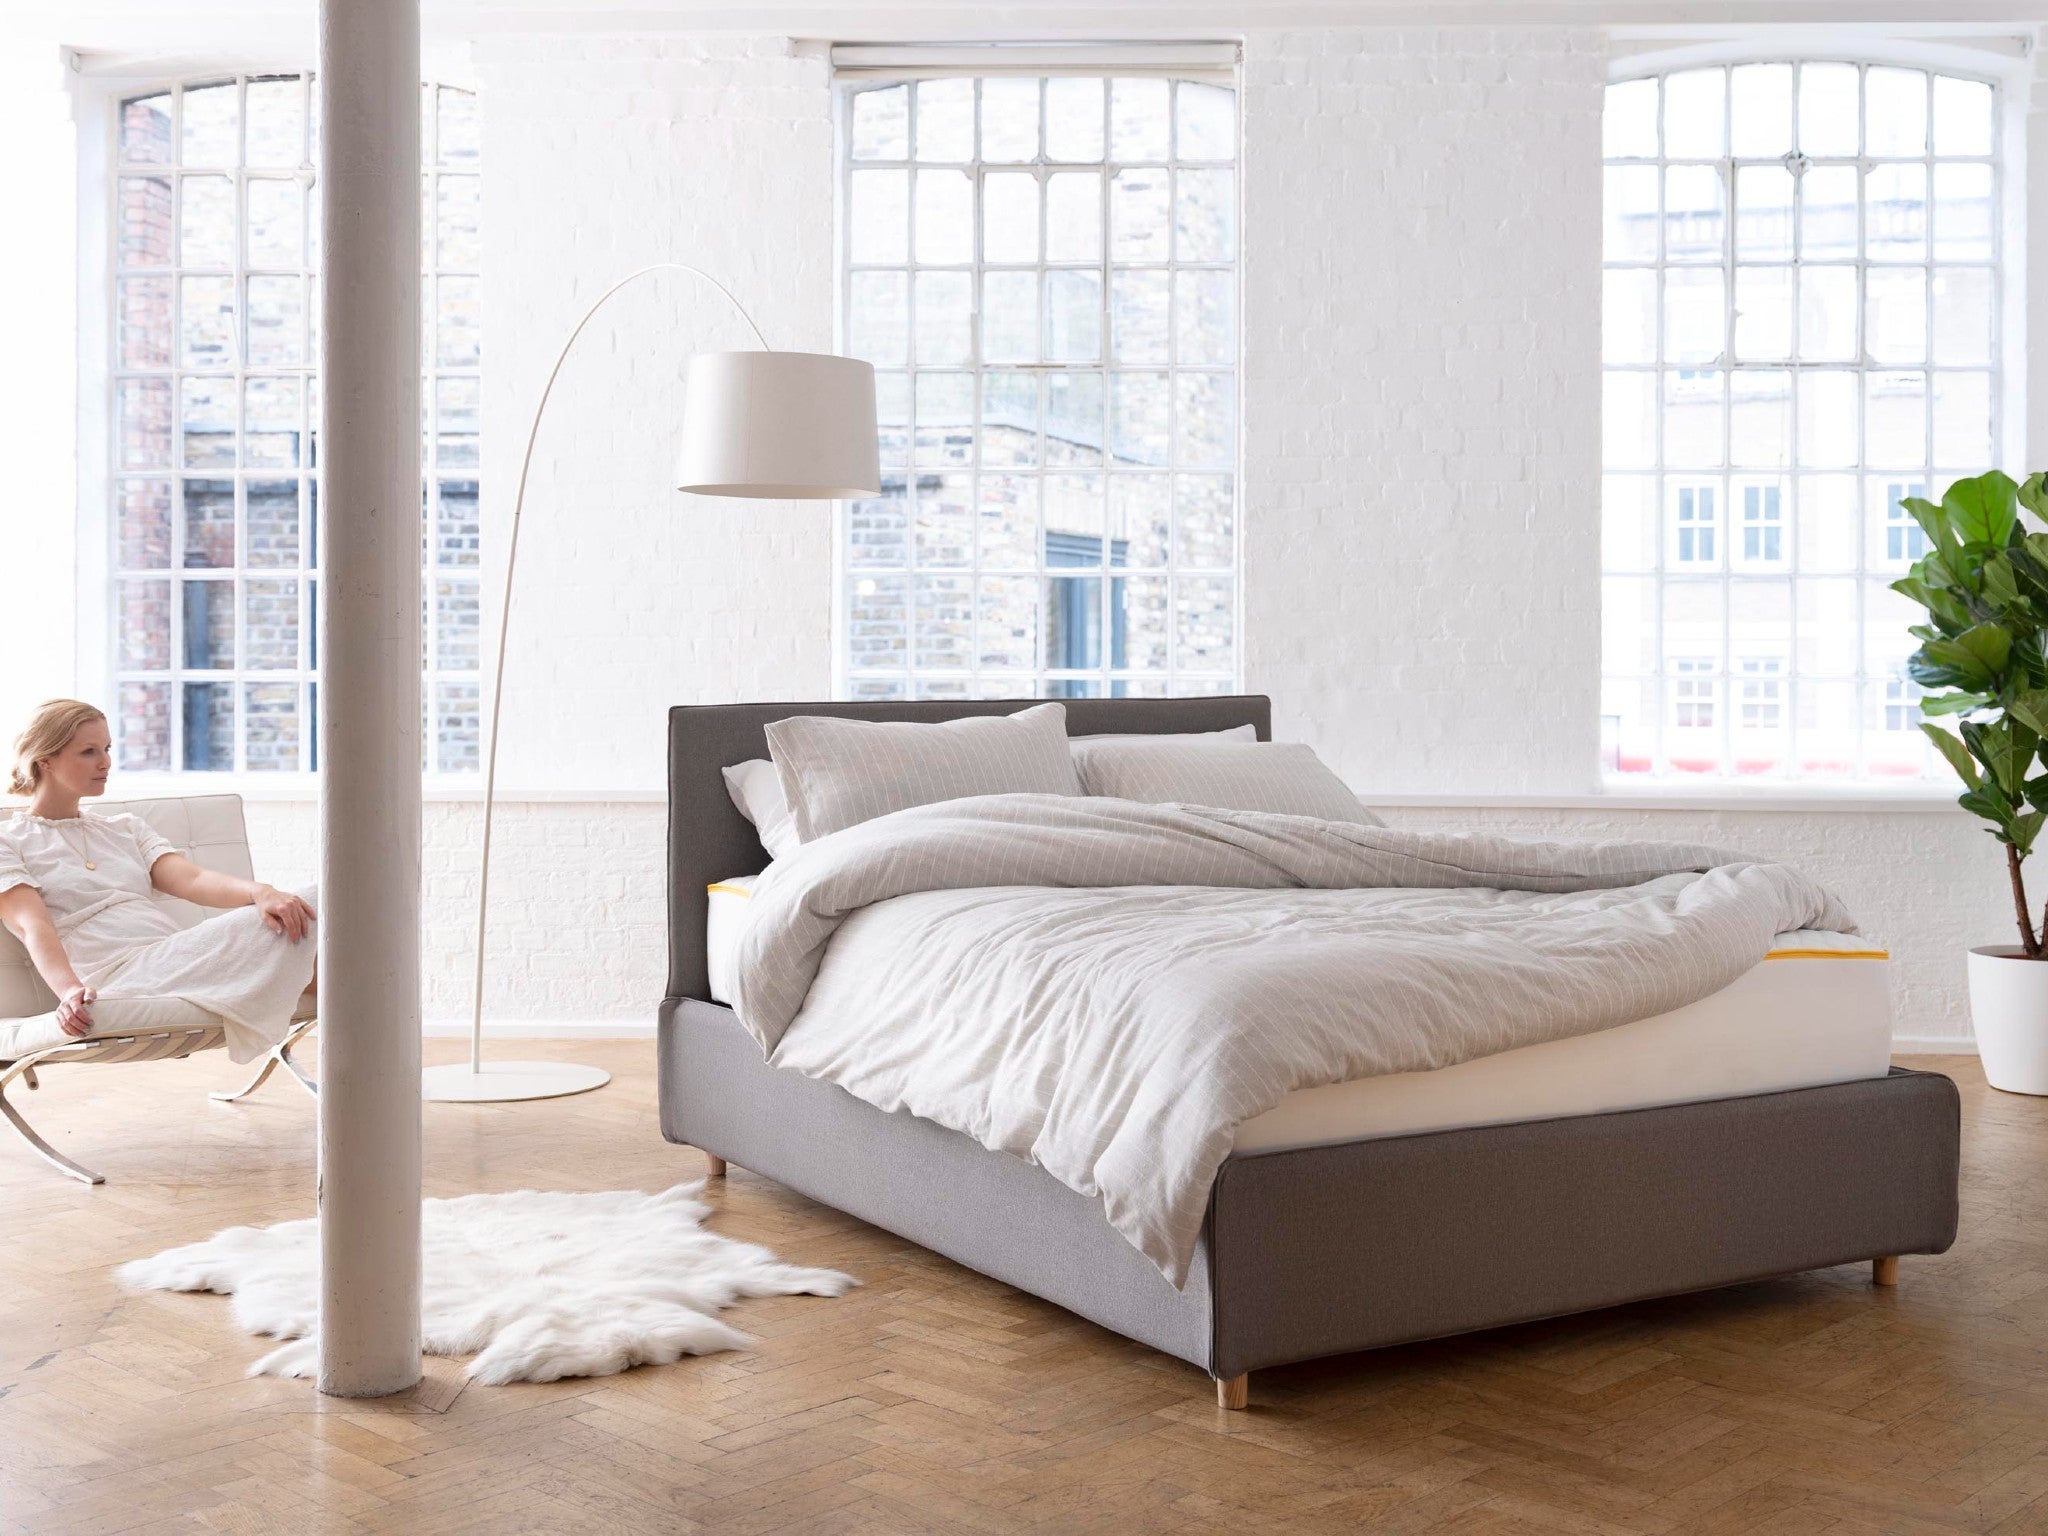 Best storage beds 2022: Space-saving designs in double, single and more  sizes | The Independent